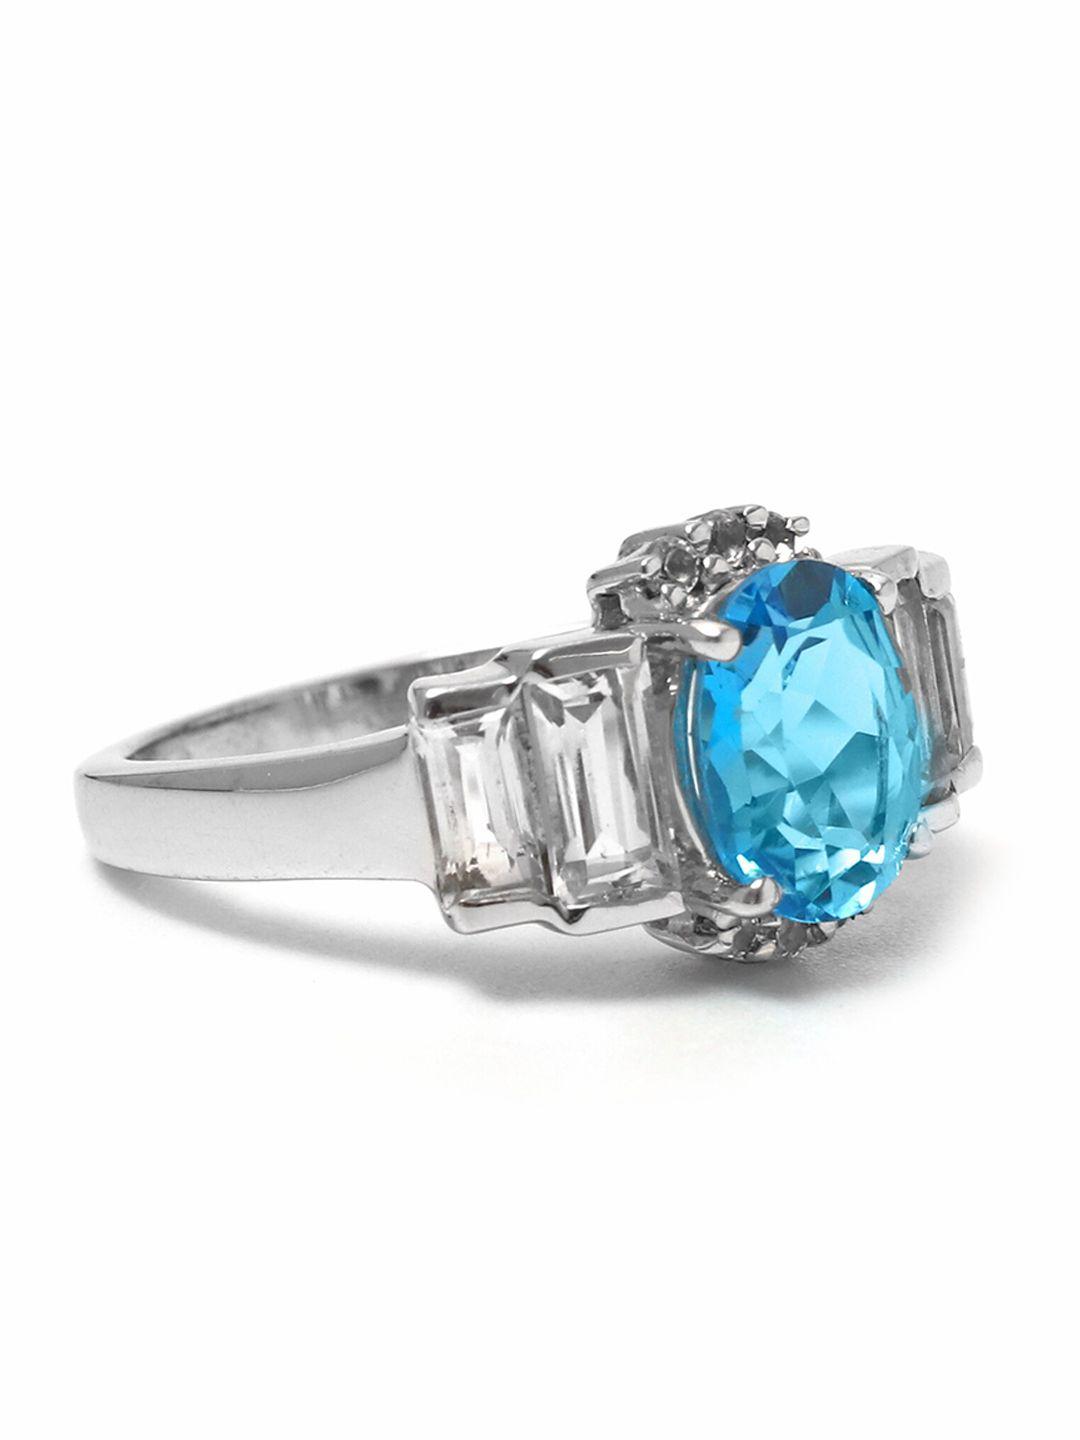 hiflyer jewels rhodium-plated 925 sterling silver & white & blue stone studded finger ring